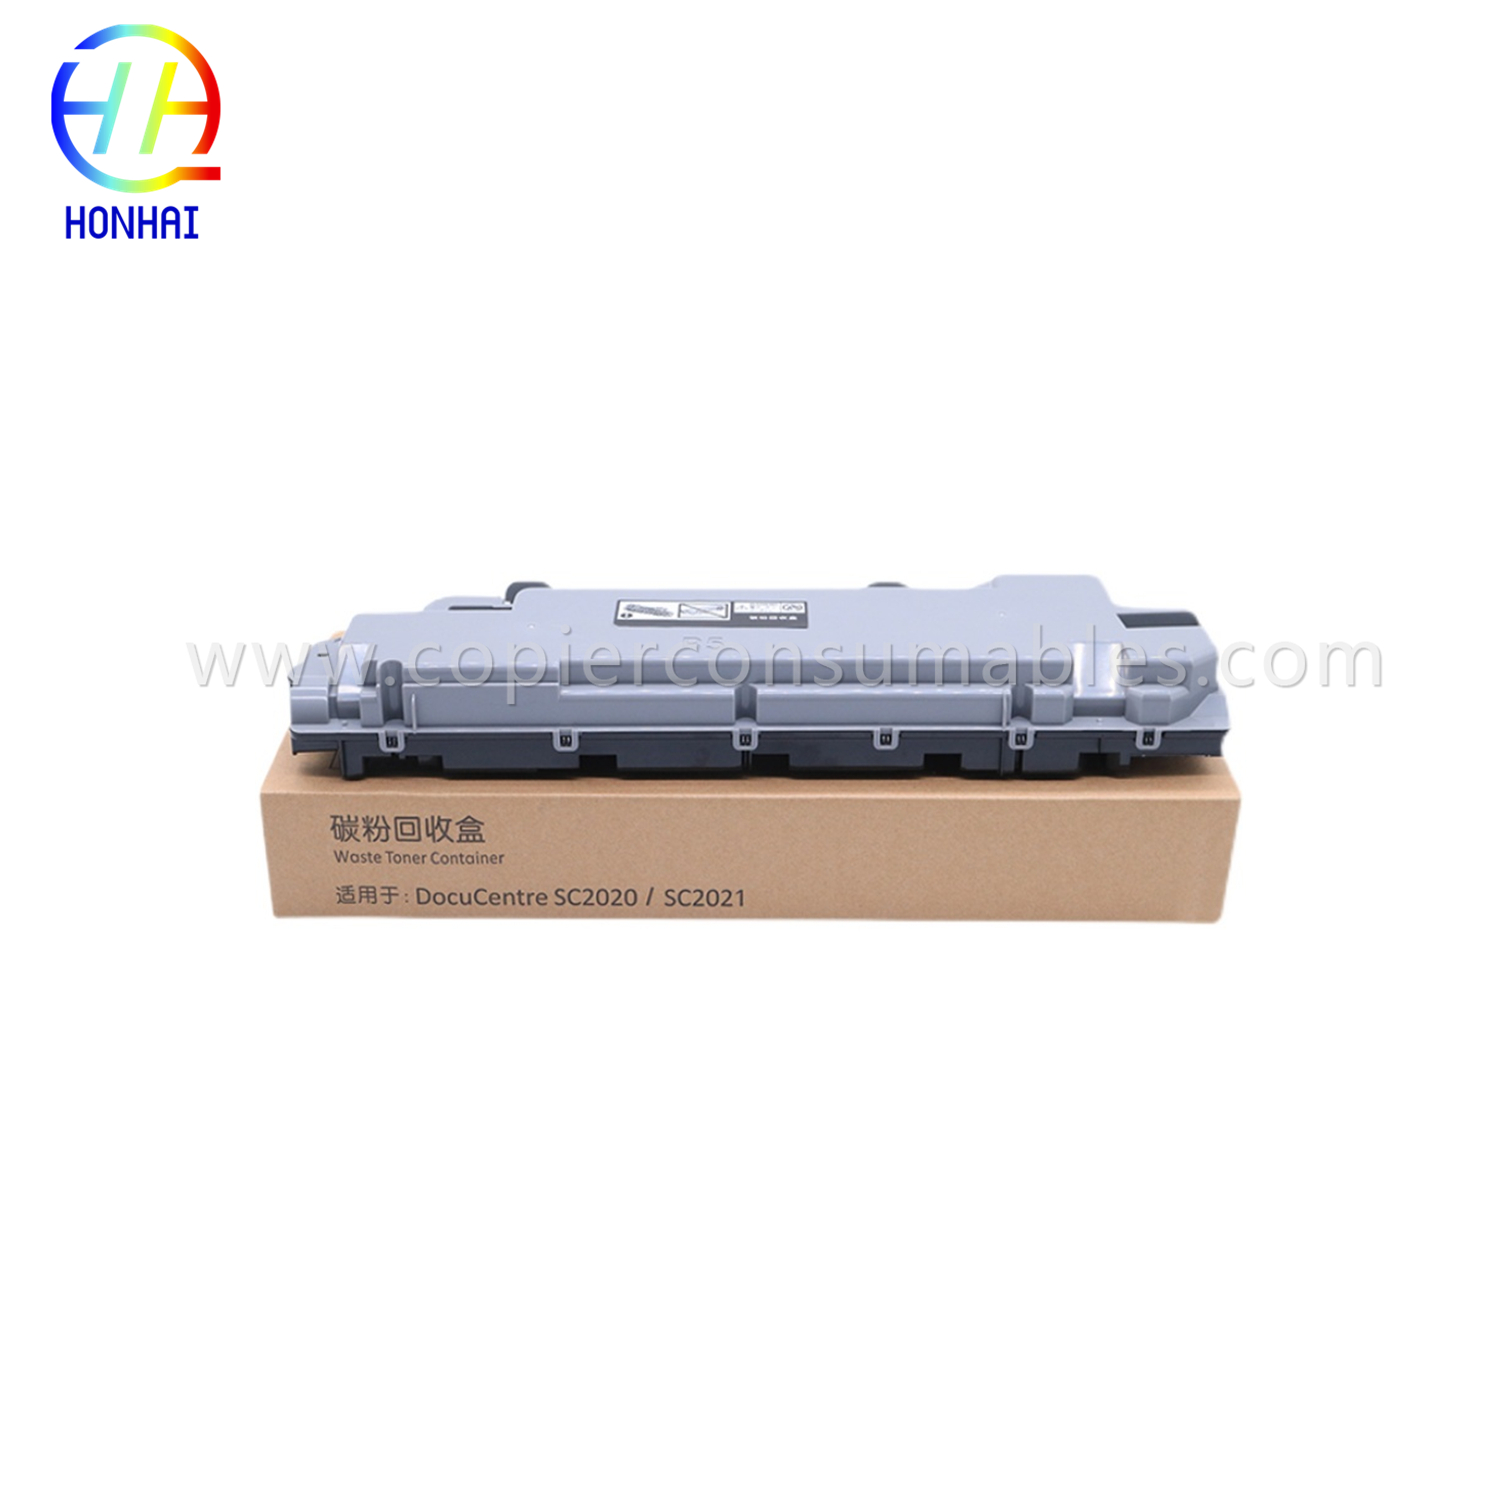 https://www.copierconsumables.com/waste-toner-container-for-xerox-sc2020-sc2021-2020-2021-cwaa0869-oem-2-product/